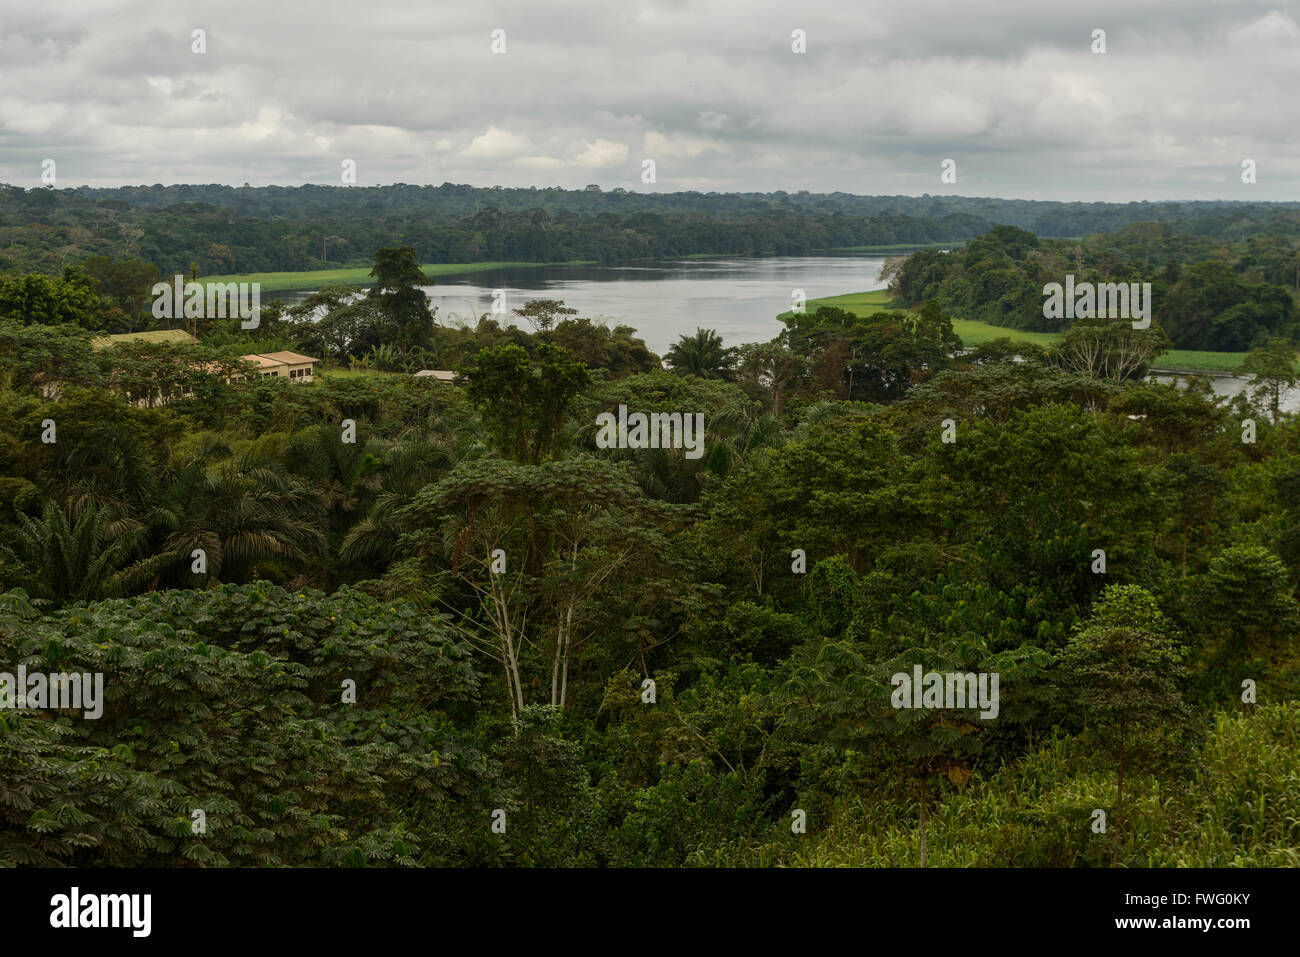 The rivers of the rainforest, Gabon, Central Africa Stock Photo